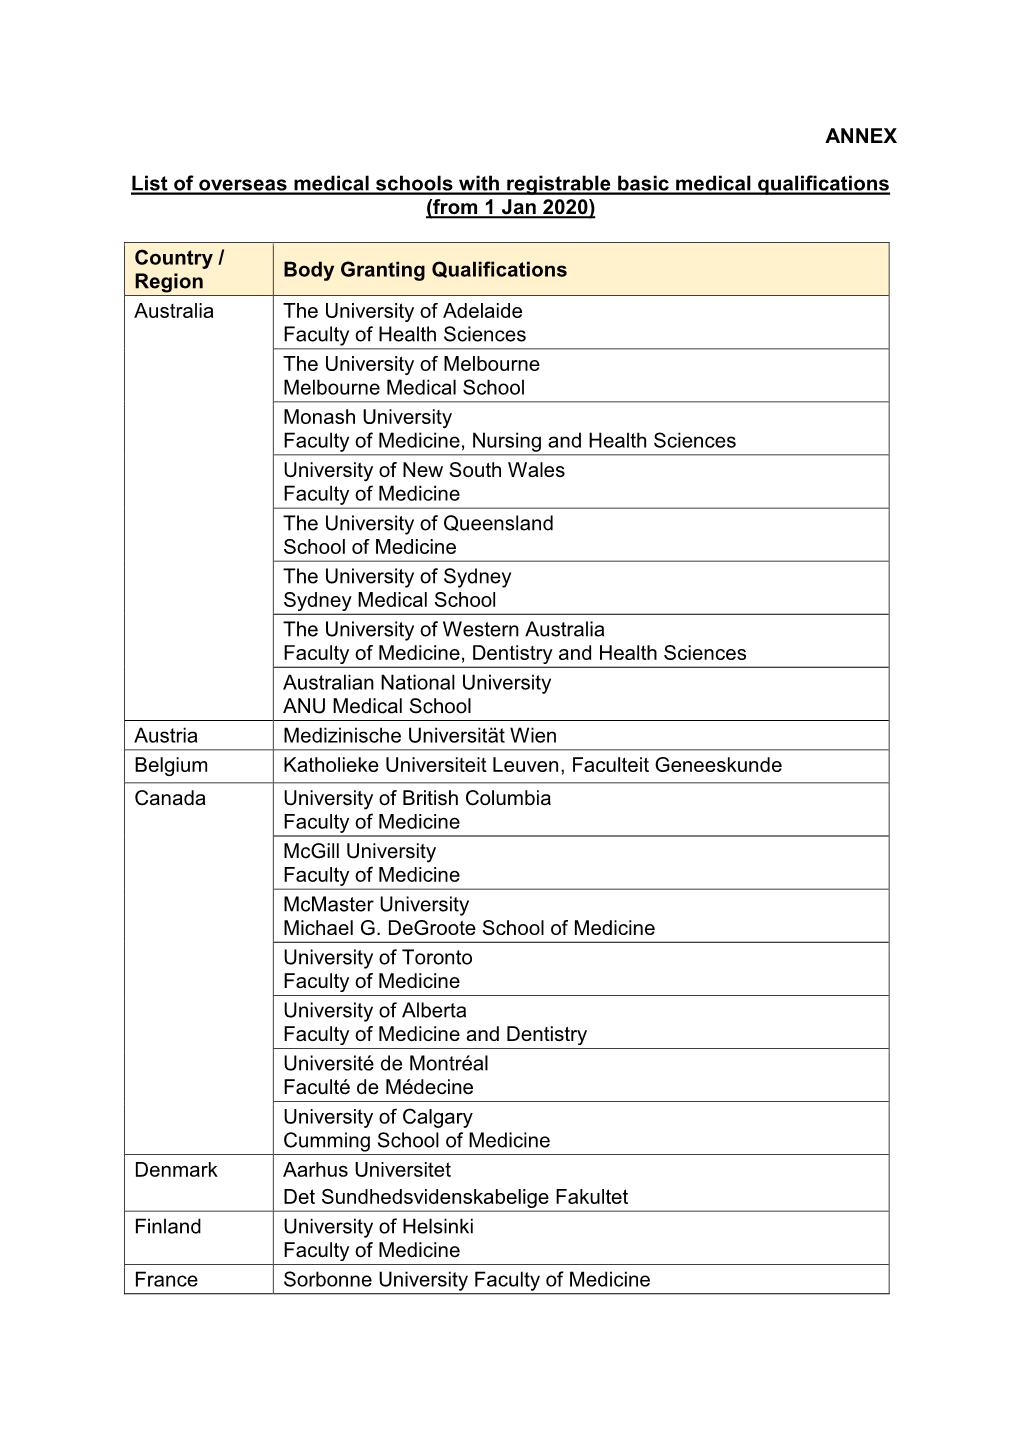 ANNEX List of Overseas Medical Schools with Registrable Basic